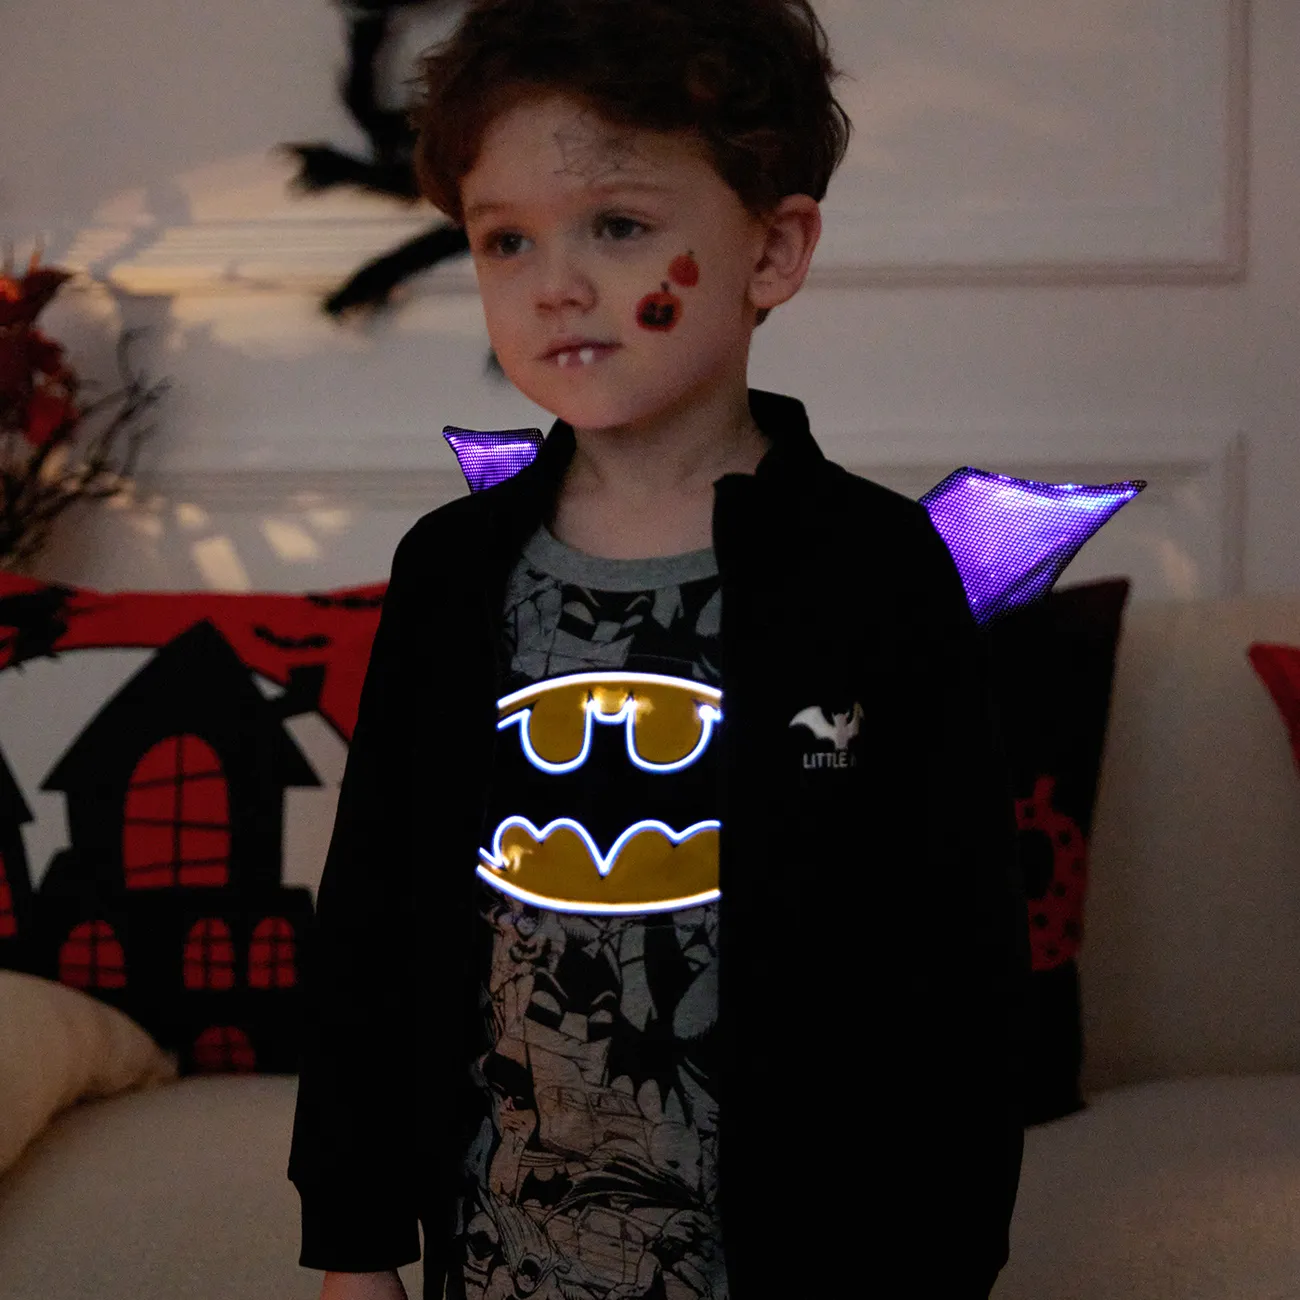 Go-Glow Illuminating Sweatshirt with Light Up Bat Wings Including Controller (Built-In Battery) Black big image 1